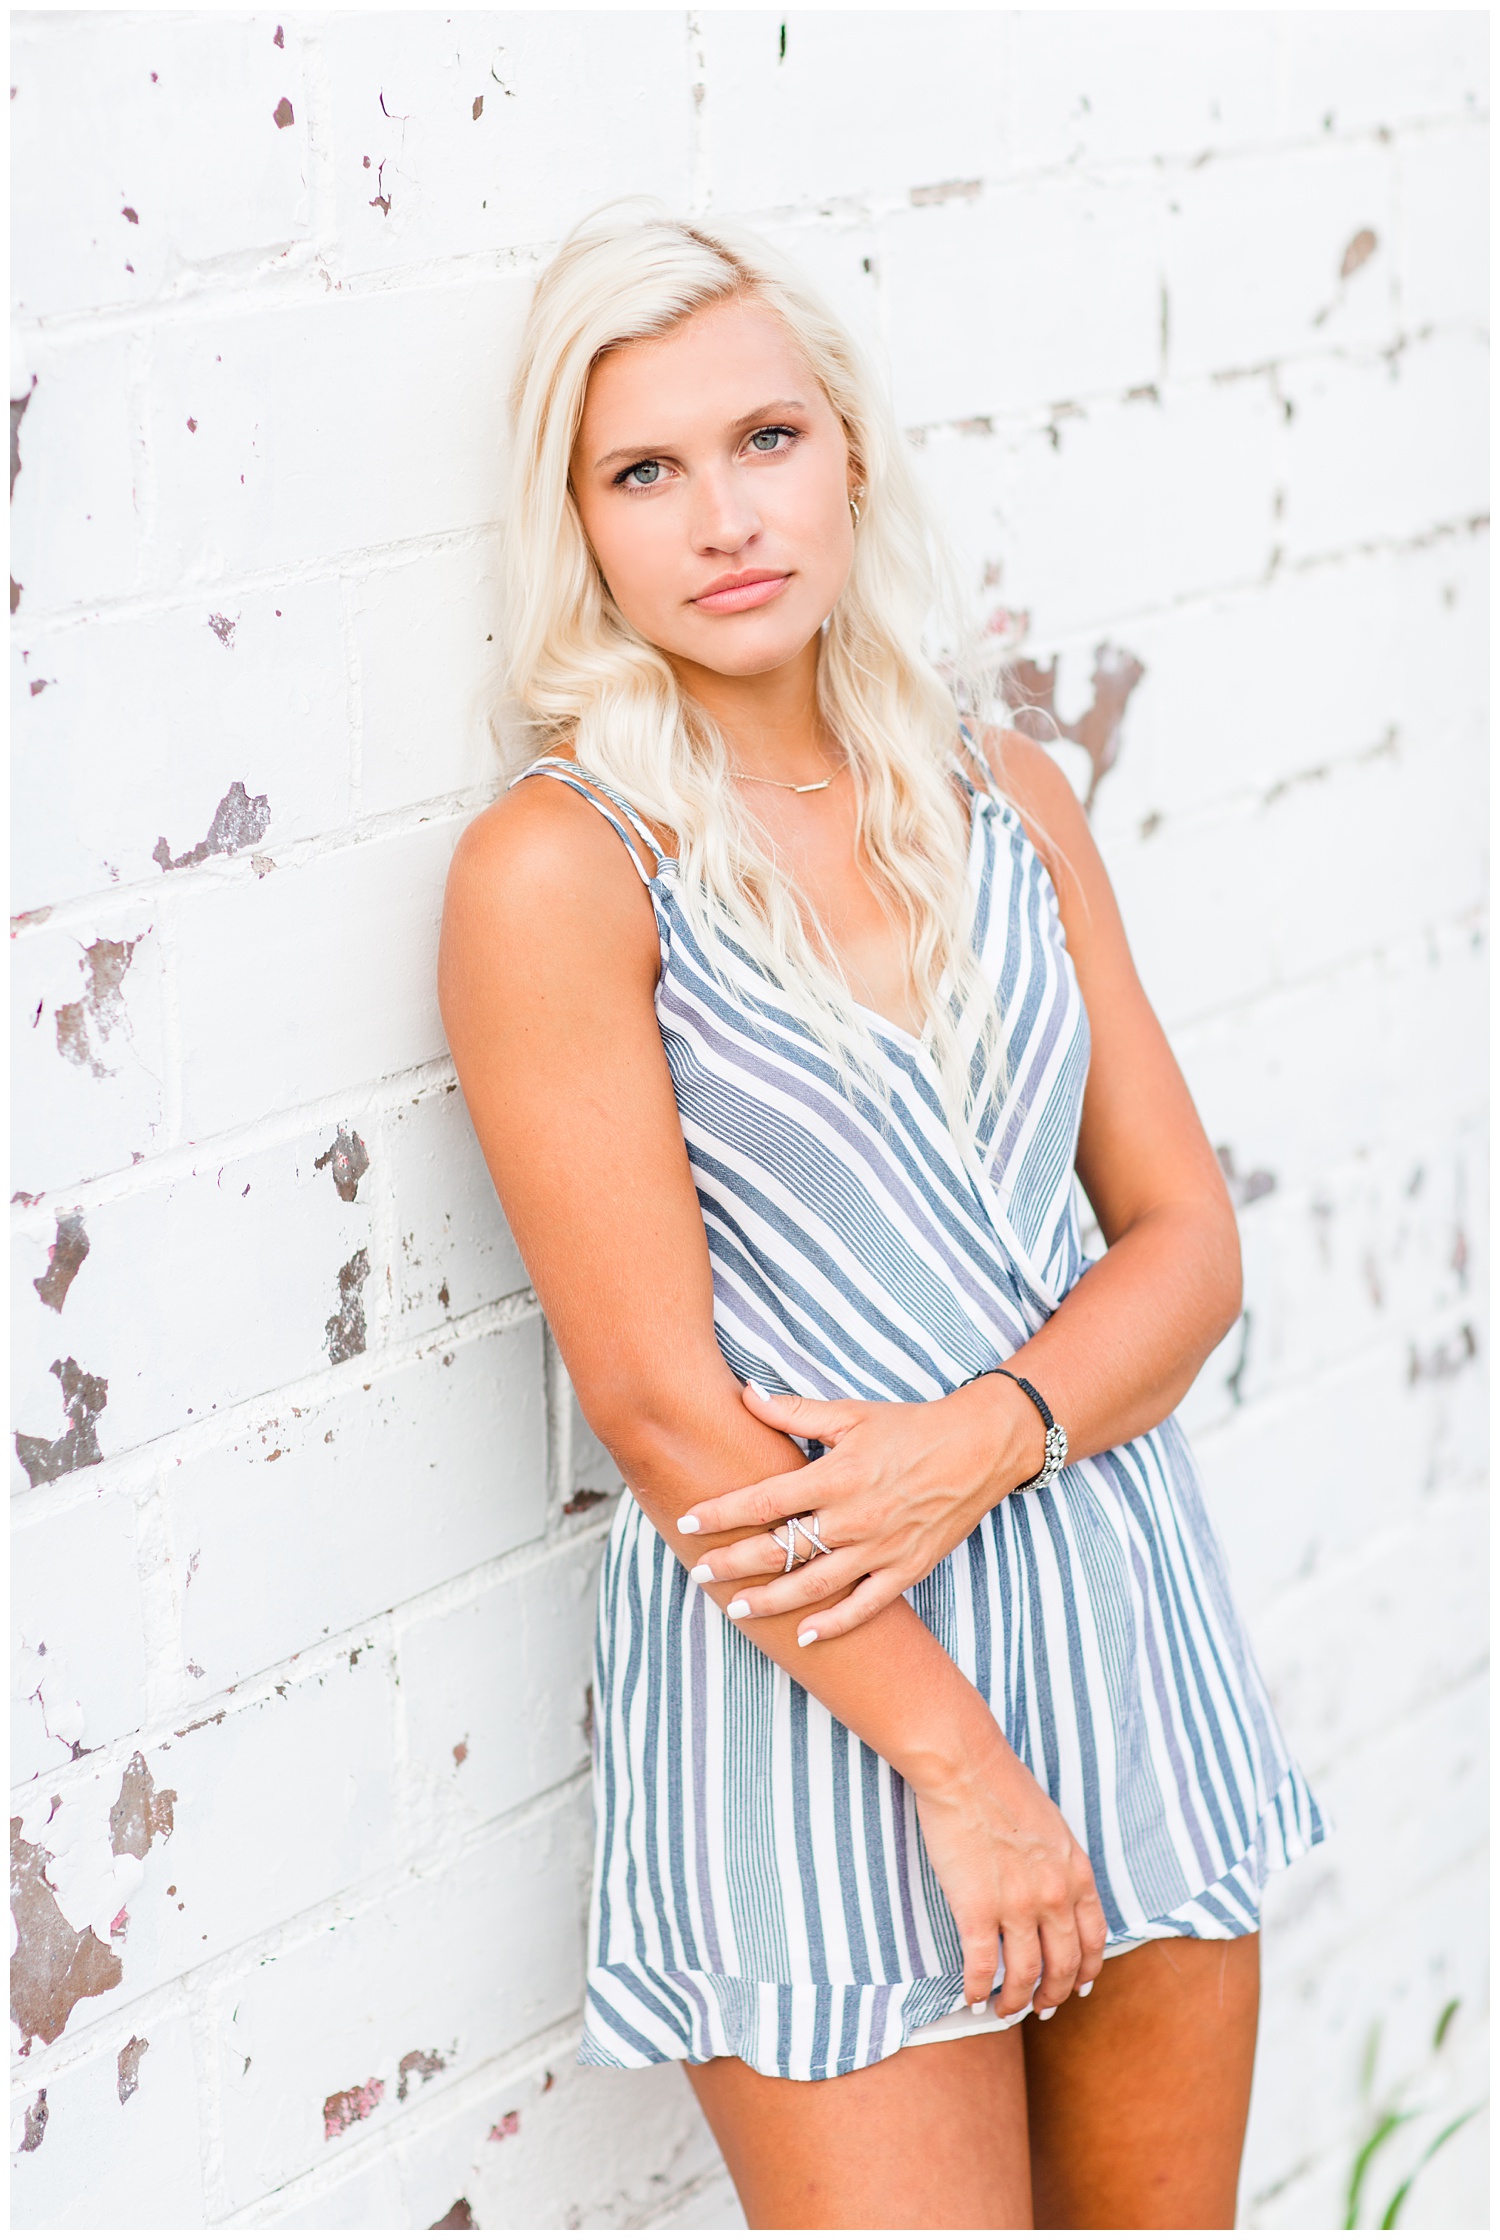 Senior girl wearing a white and blue romper leans against a rustic, white washed brick wall in downtown Algona, Iowa | CB Studio